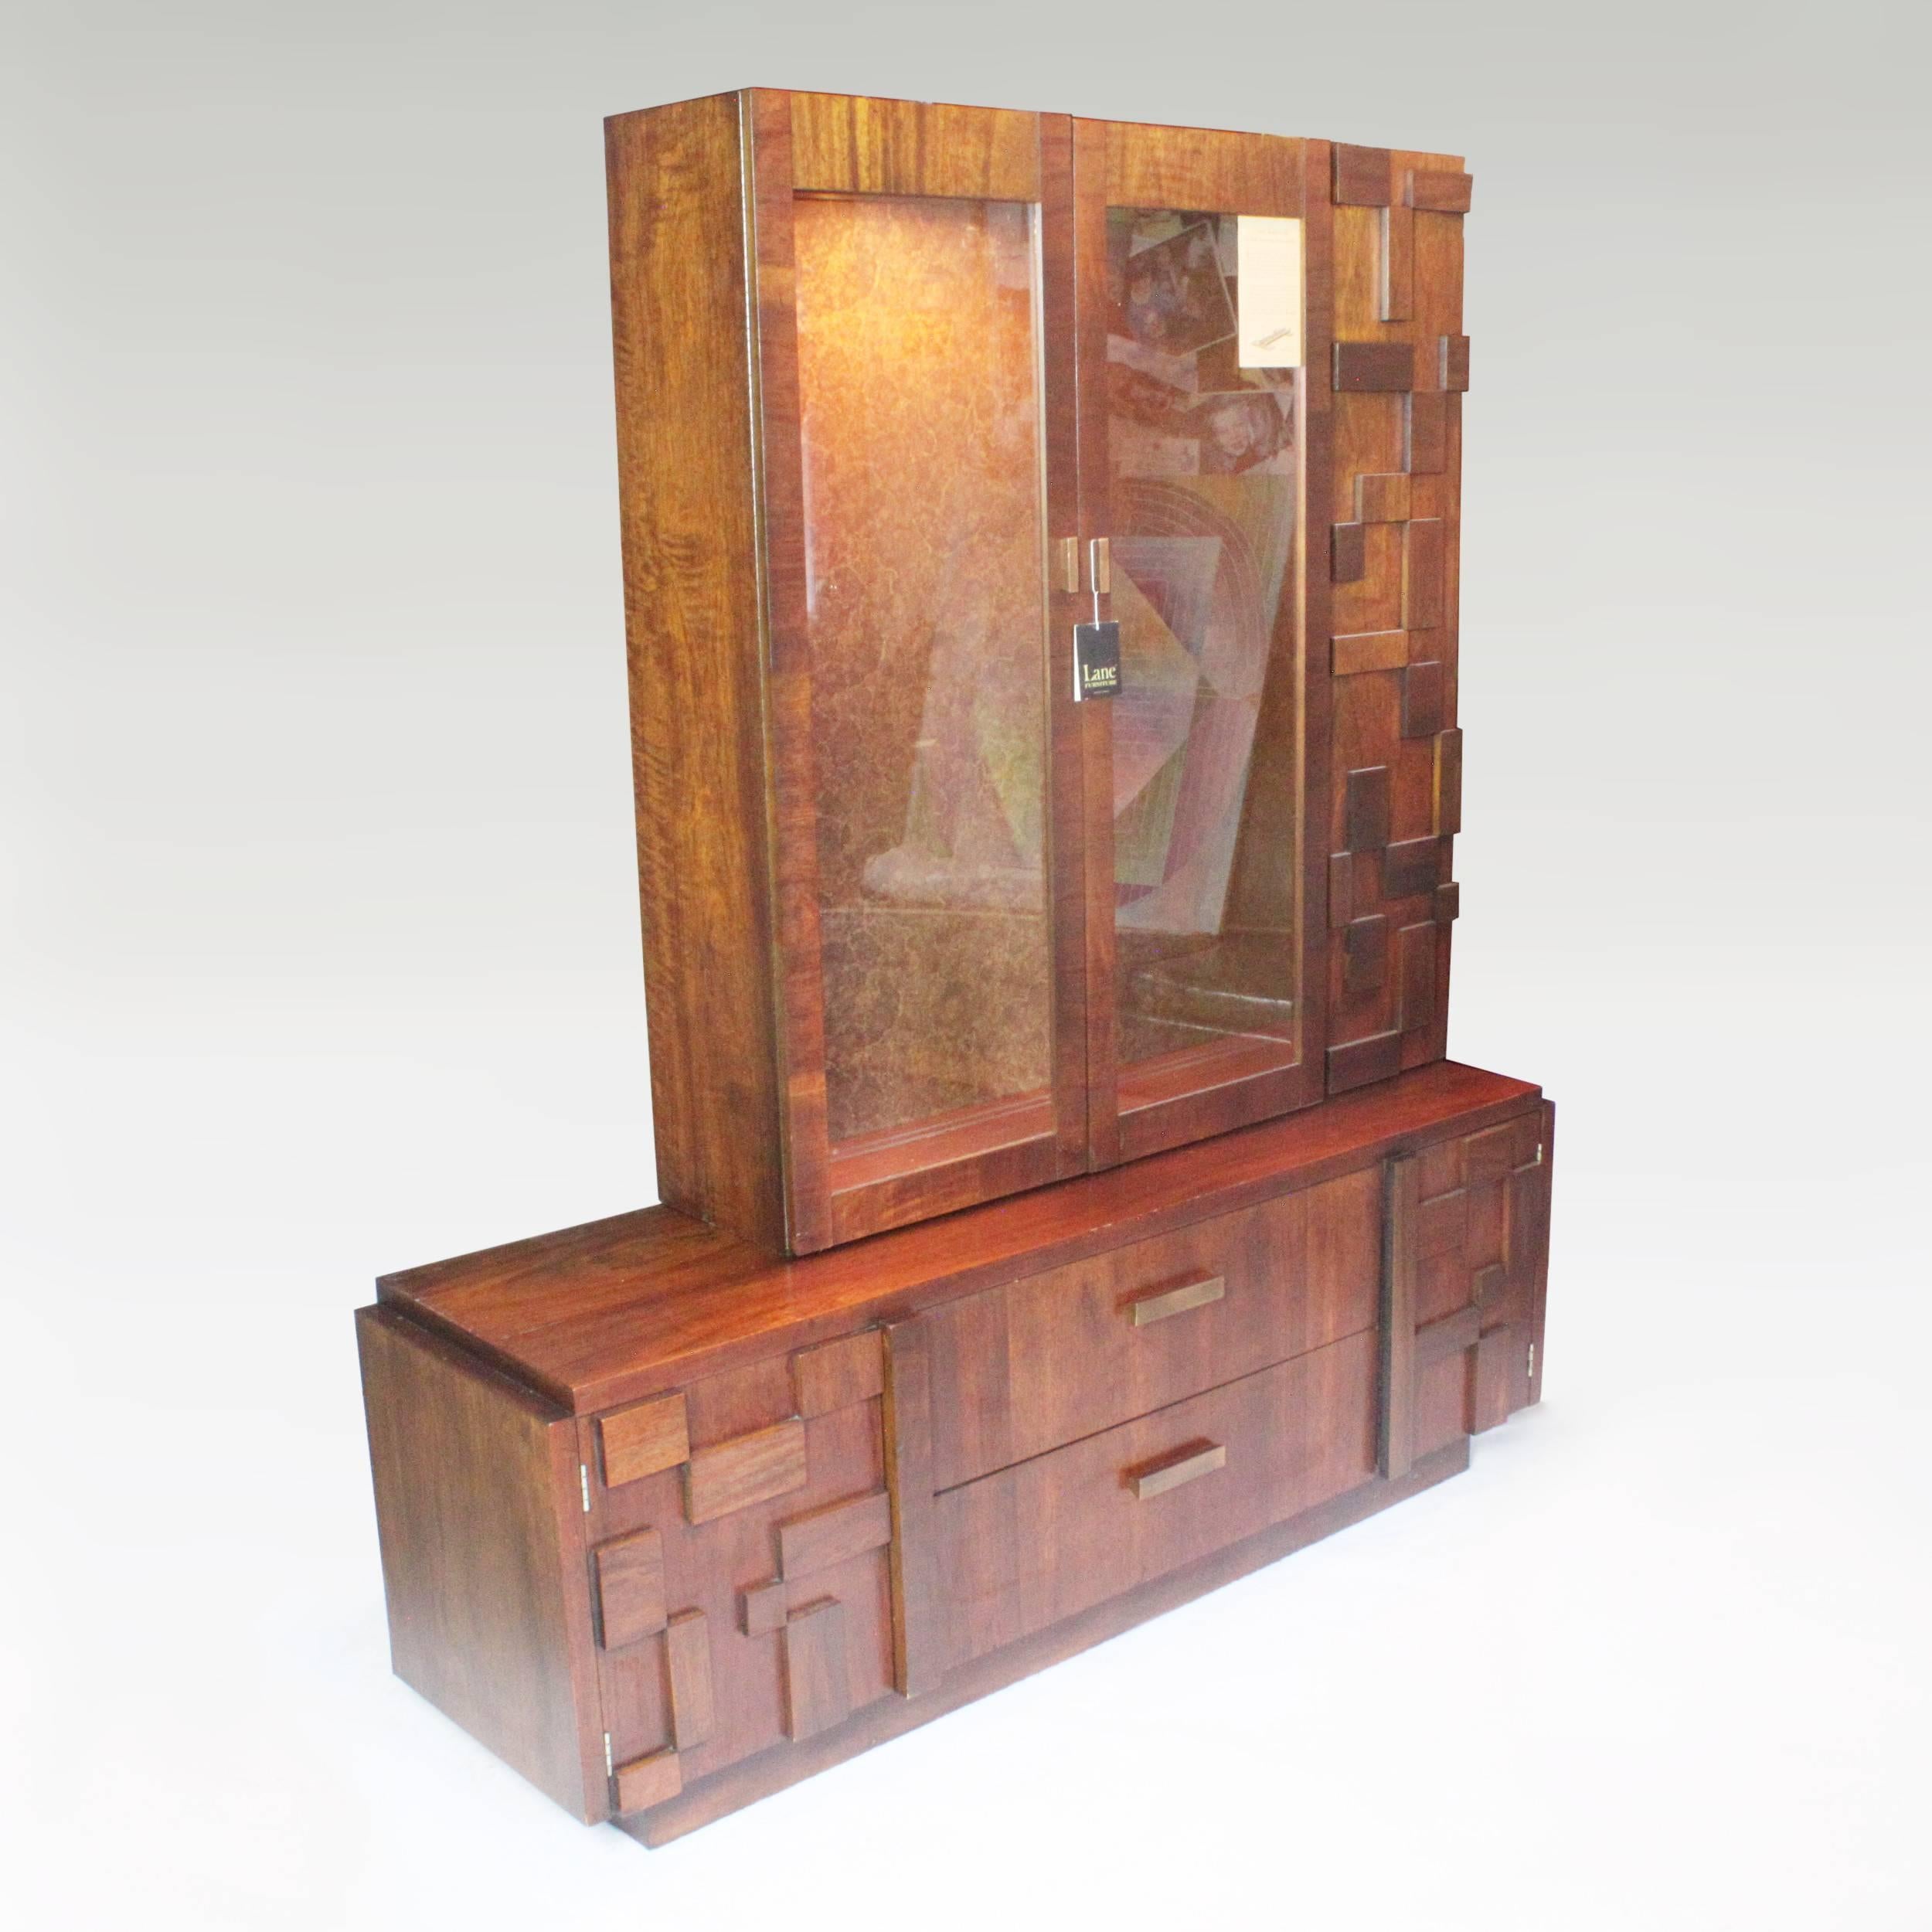 This striking piece by lane features applied mosaic blocks motifs that give it an exemplary Brutalist style. Cabinet features walnut veneer, two-door or two-drawer lower cabinet and twin glass door upper cabinet with interior light and two glass